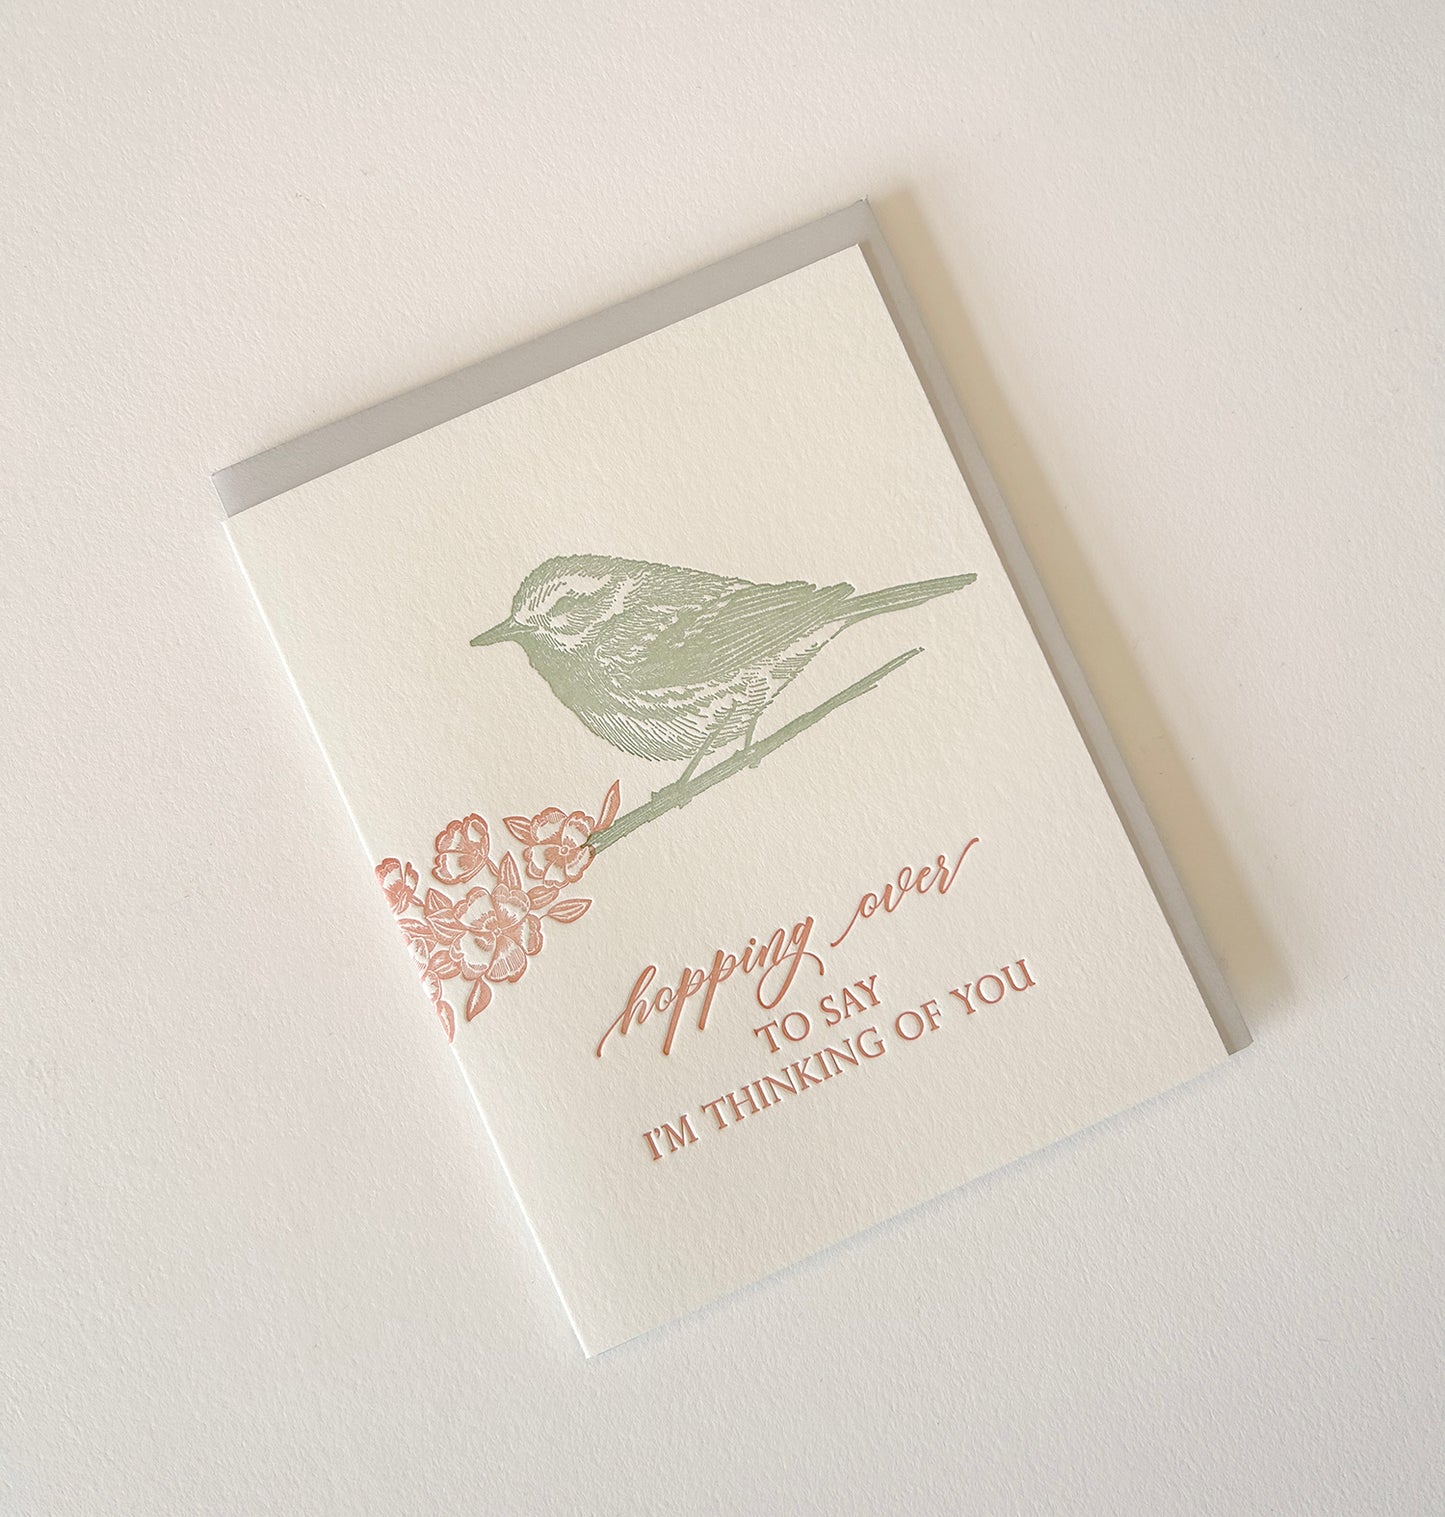 Hopping Over To Say I'm Thinking Of You Letterpress Greeting Card